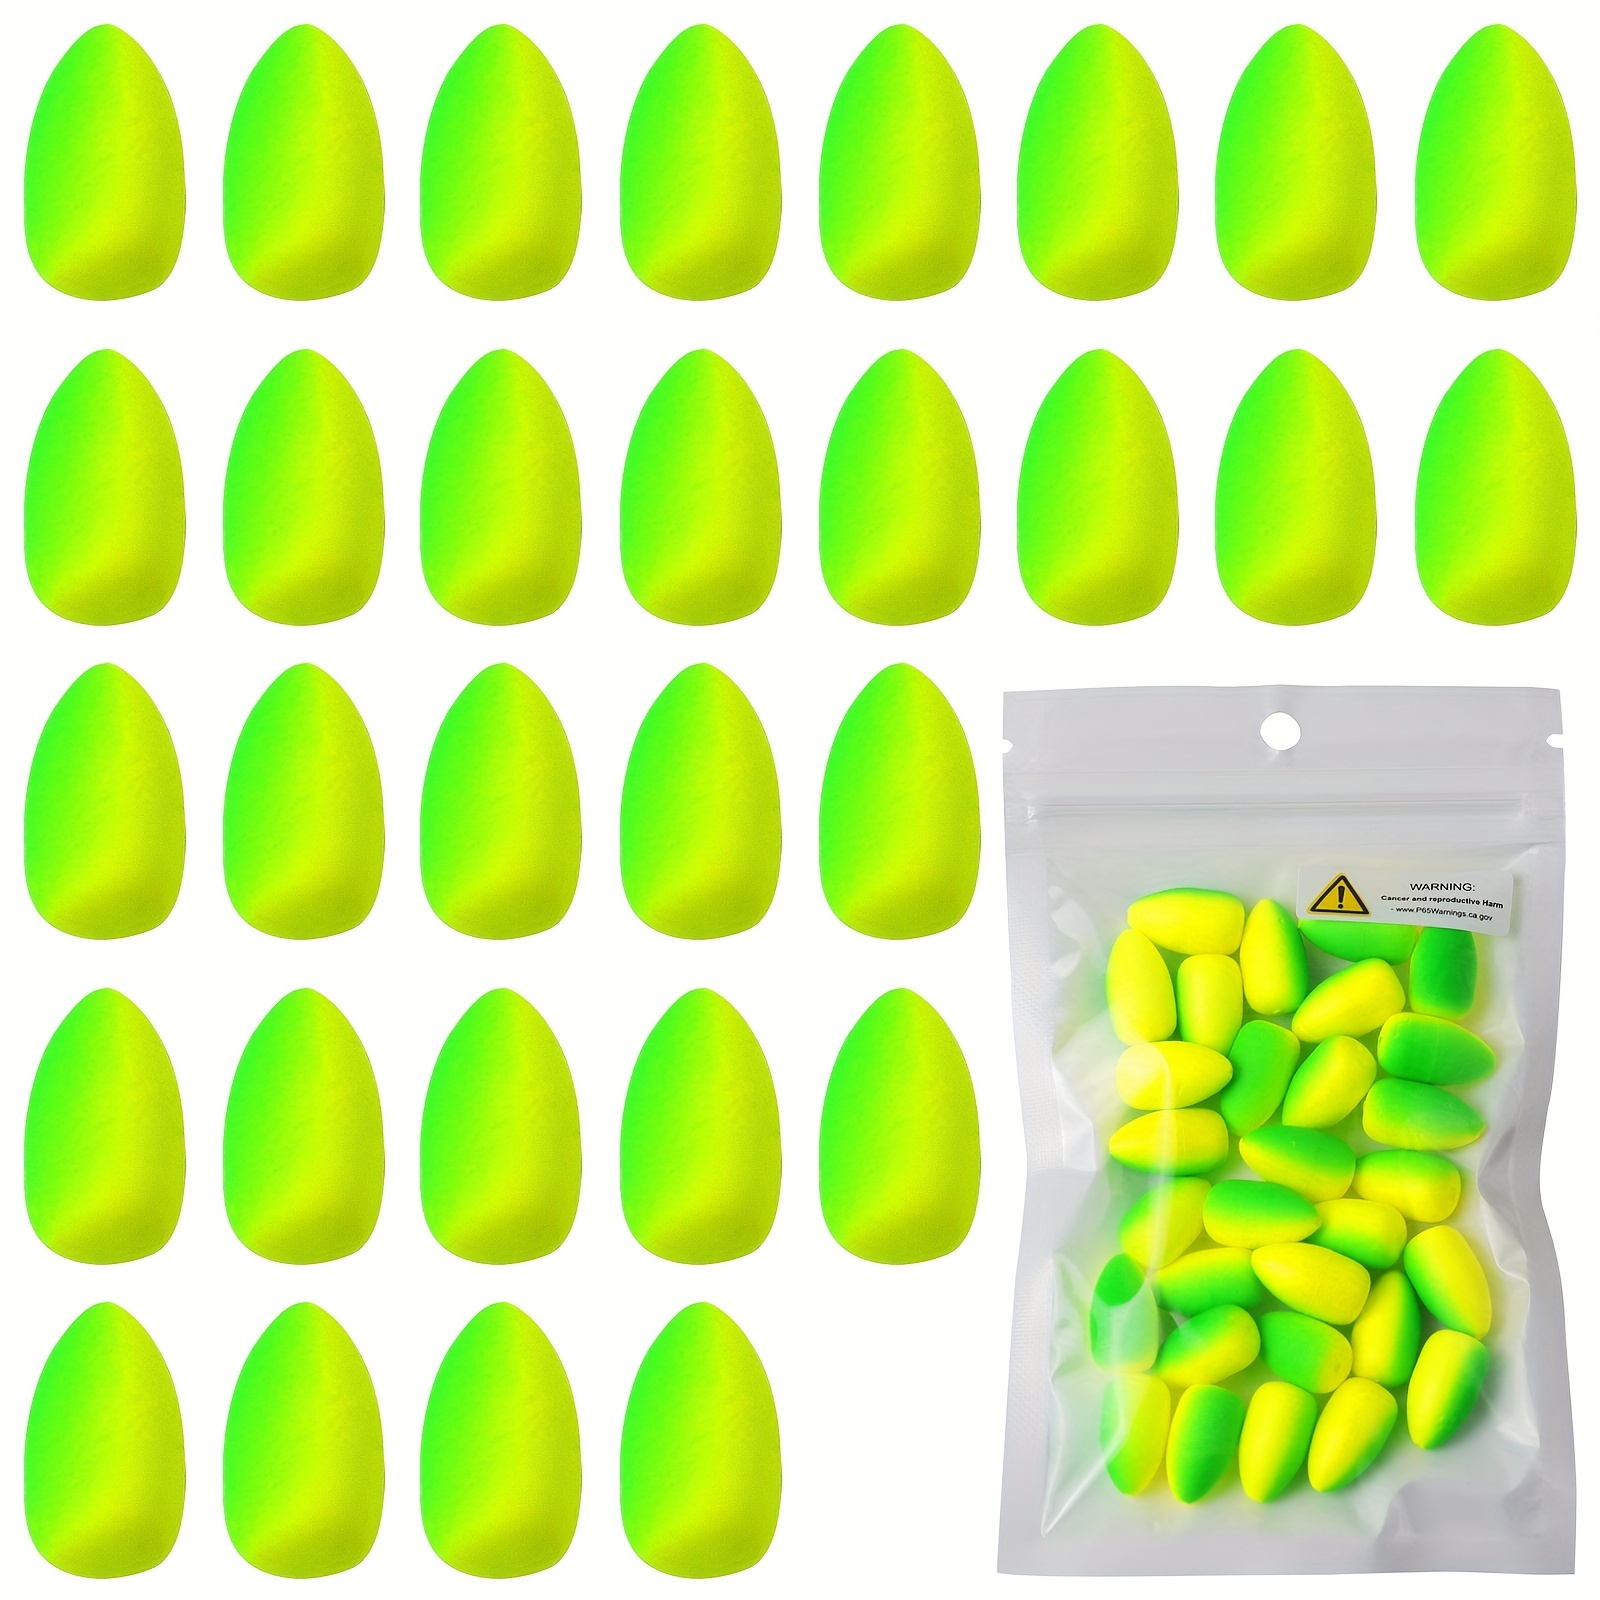 80pcs Fishing Floats Set: Foam Floats, Pompano Rigs & Cylindrical Floats -  Perfect for All Types of Rigging - Includes Tackle Box!